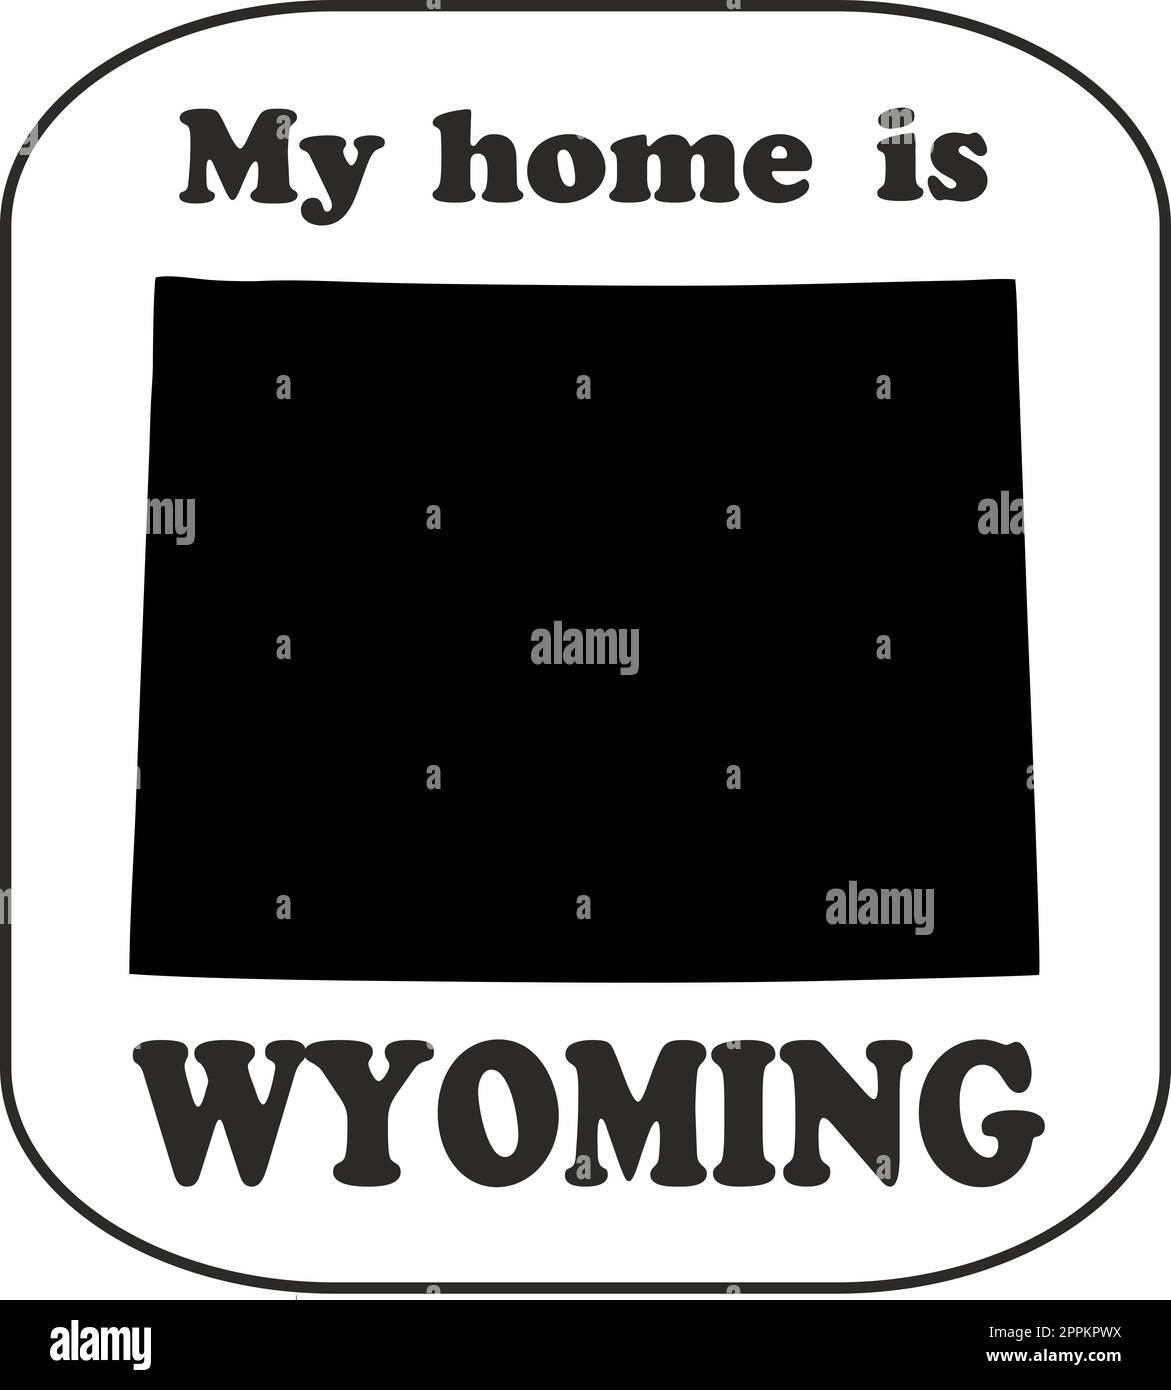 Oval sticker with text My home is Wyoming. vehicle badge Stock Photo